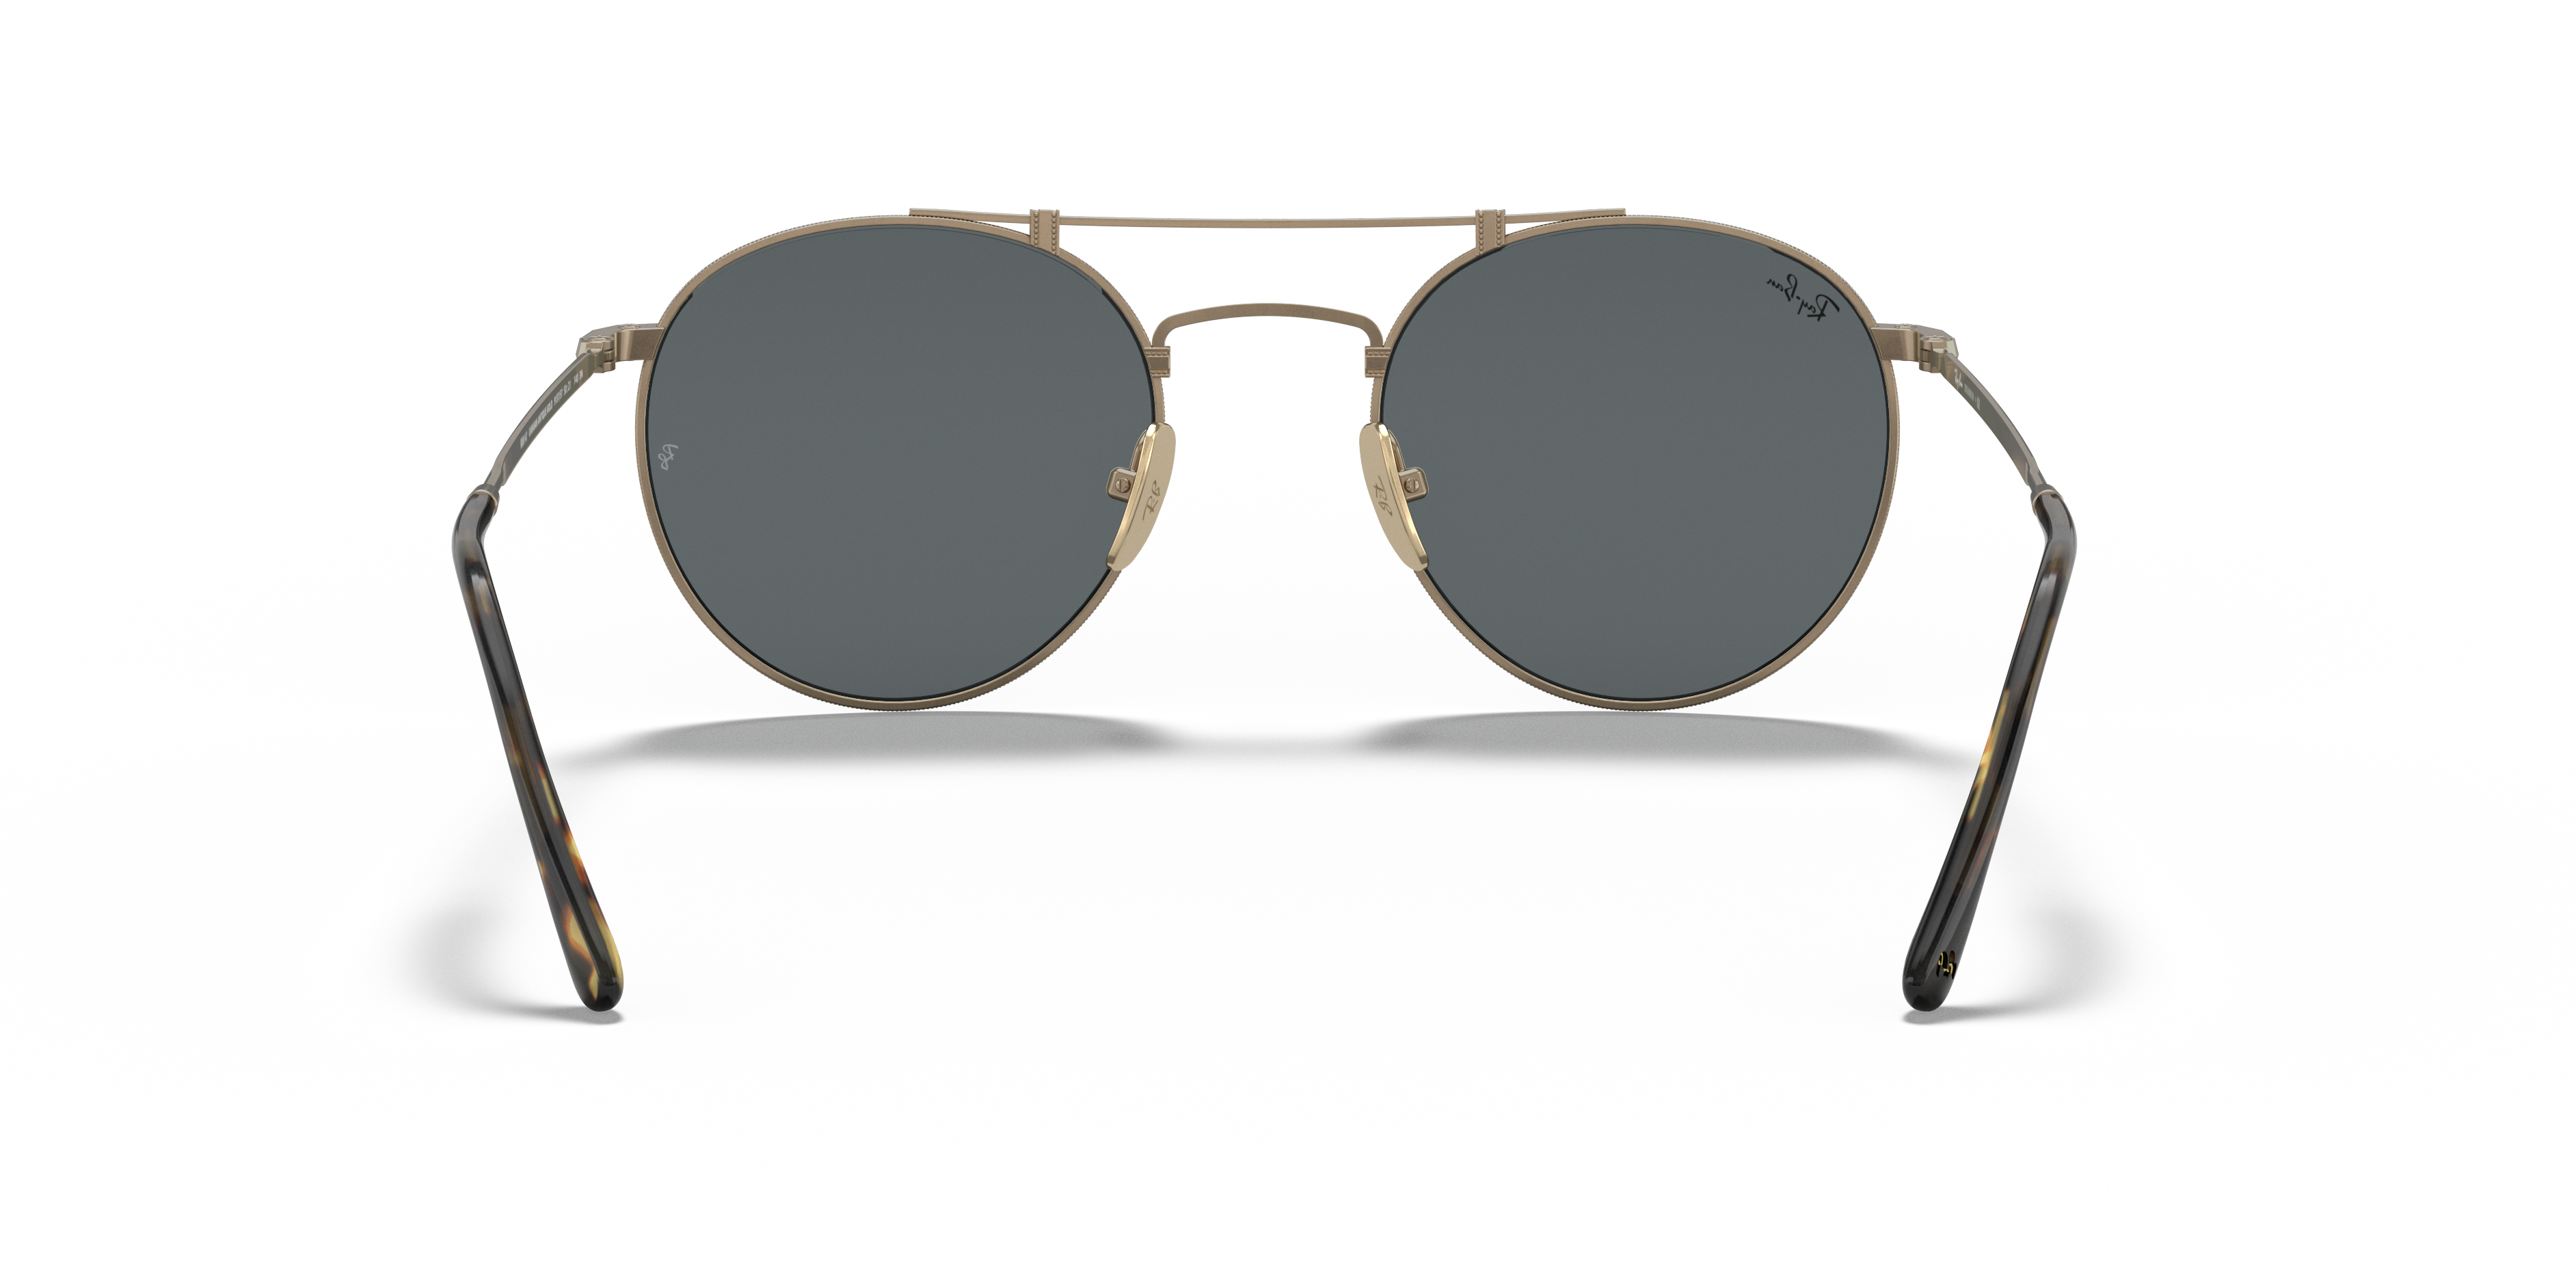 Check out the Round Double Bridge Titanium at ray-ban.com